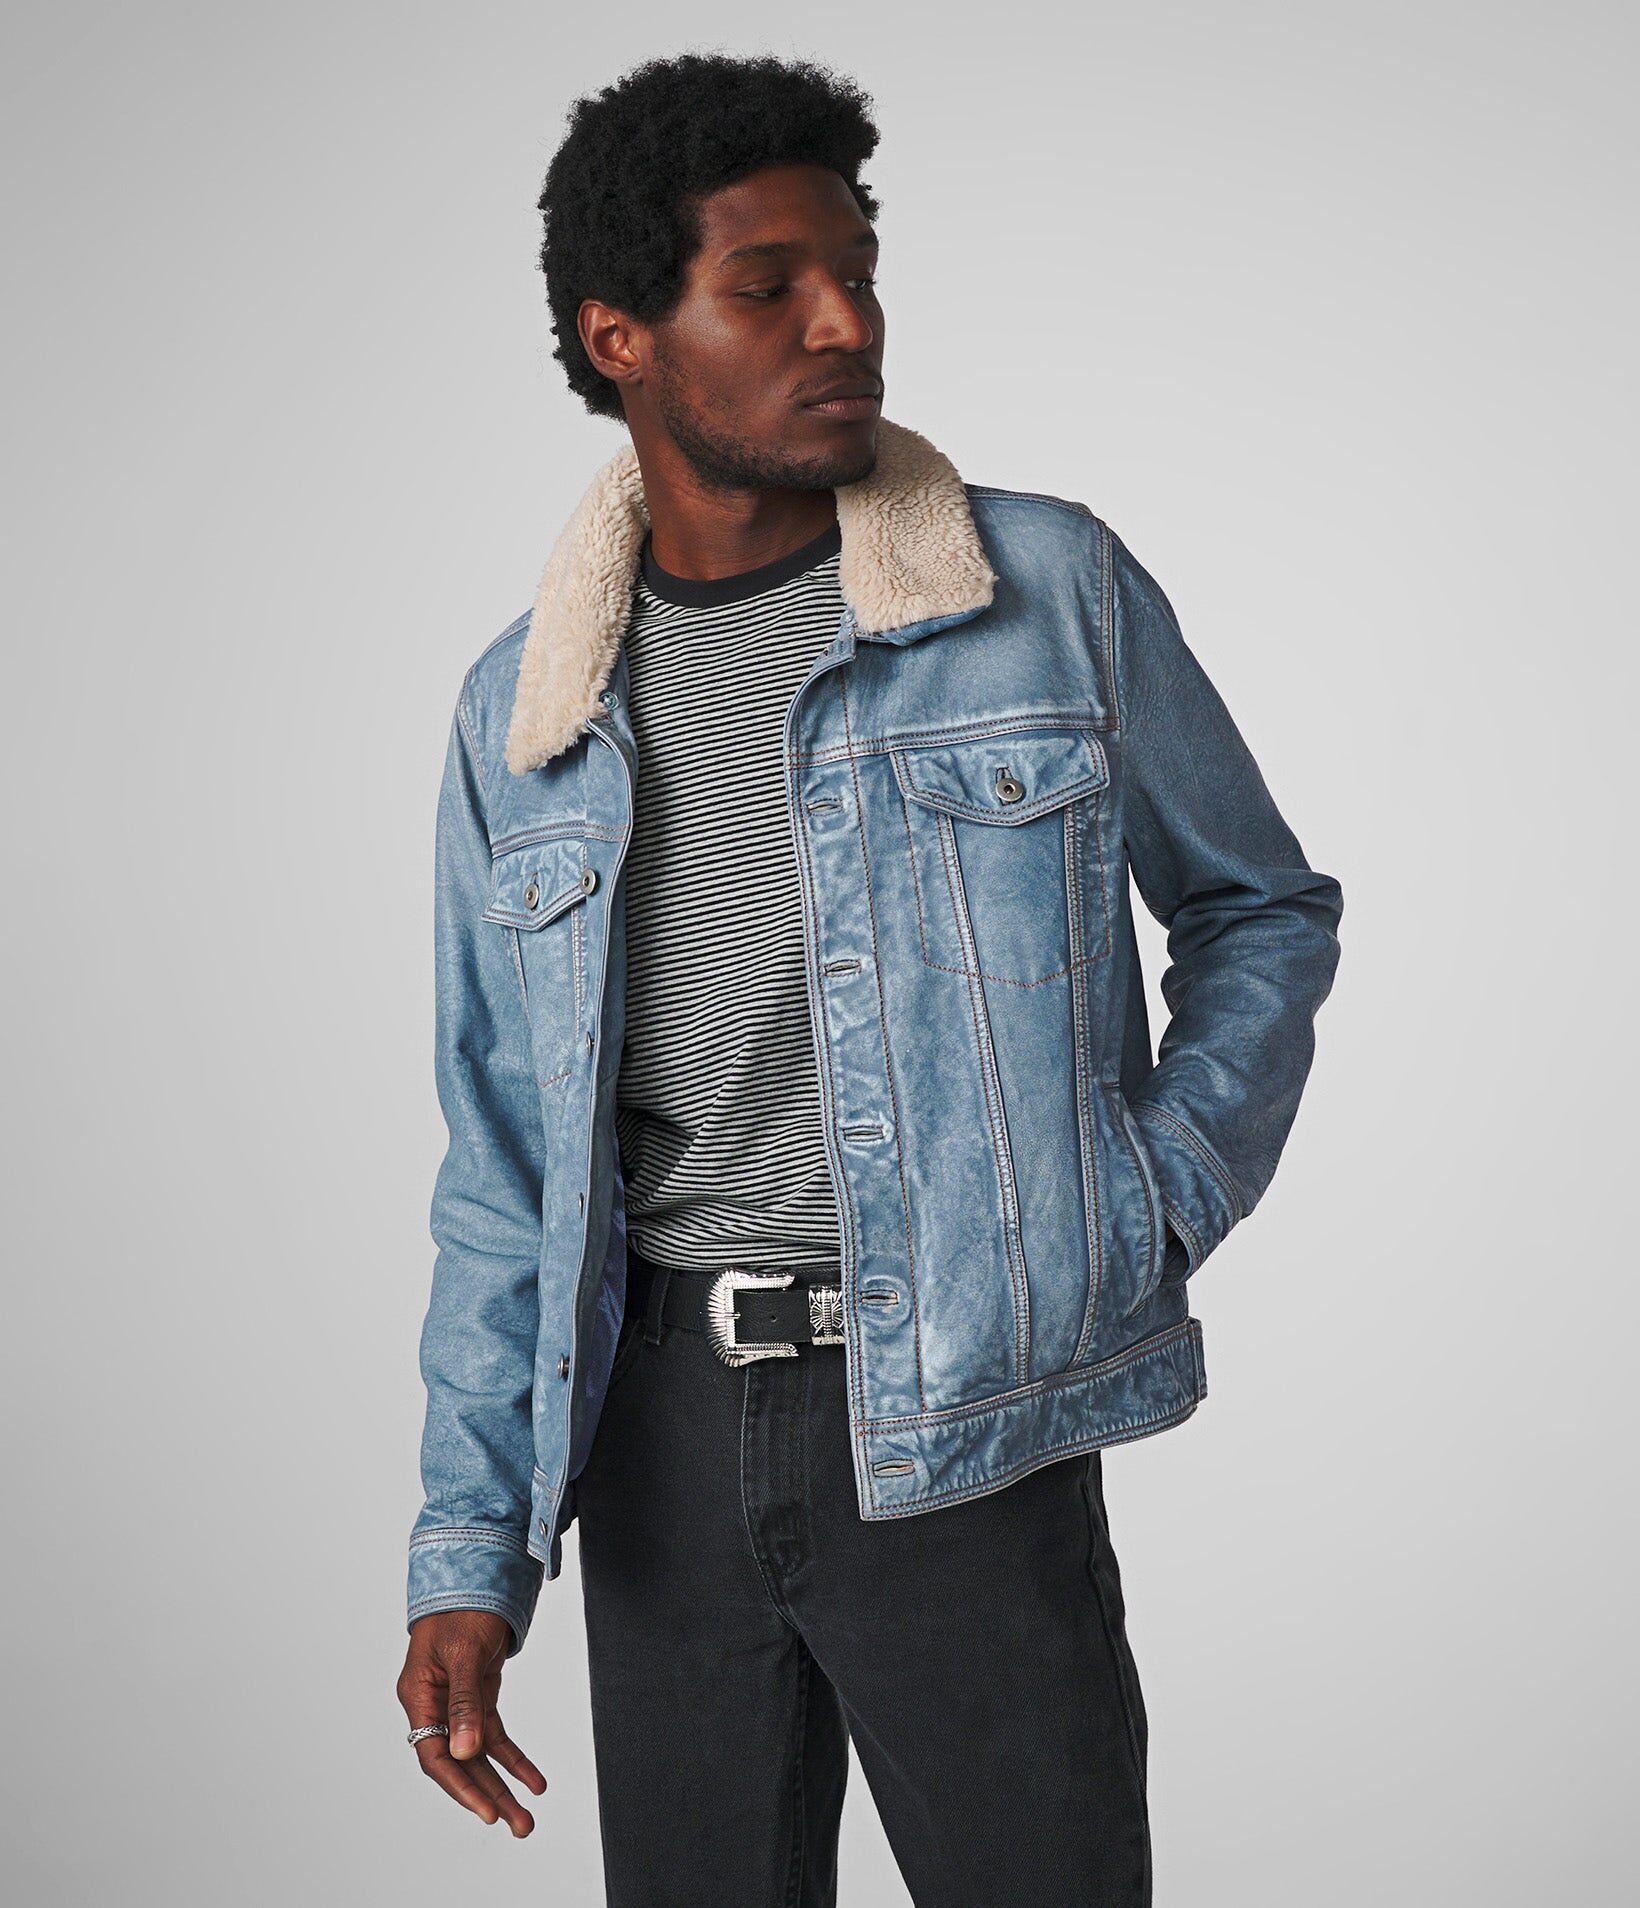 Wilsons Leather   Men's Luxton Denim Leather Jacket With Shearling   Light Blue   Large